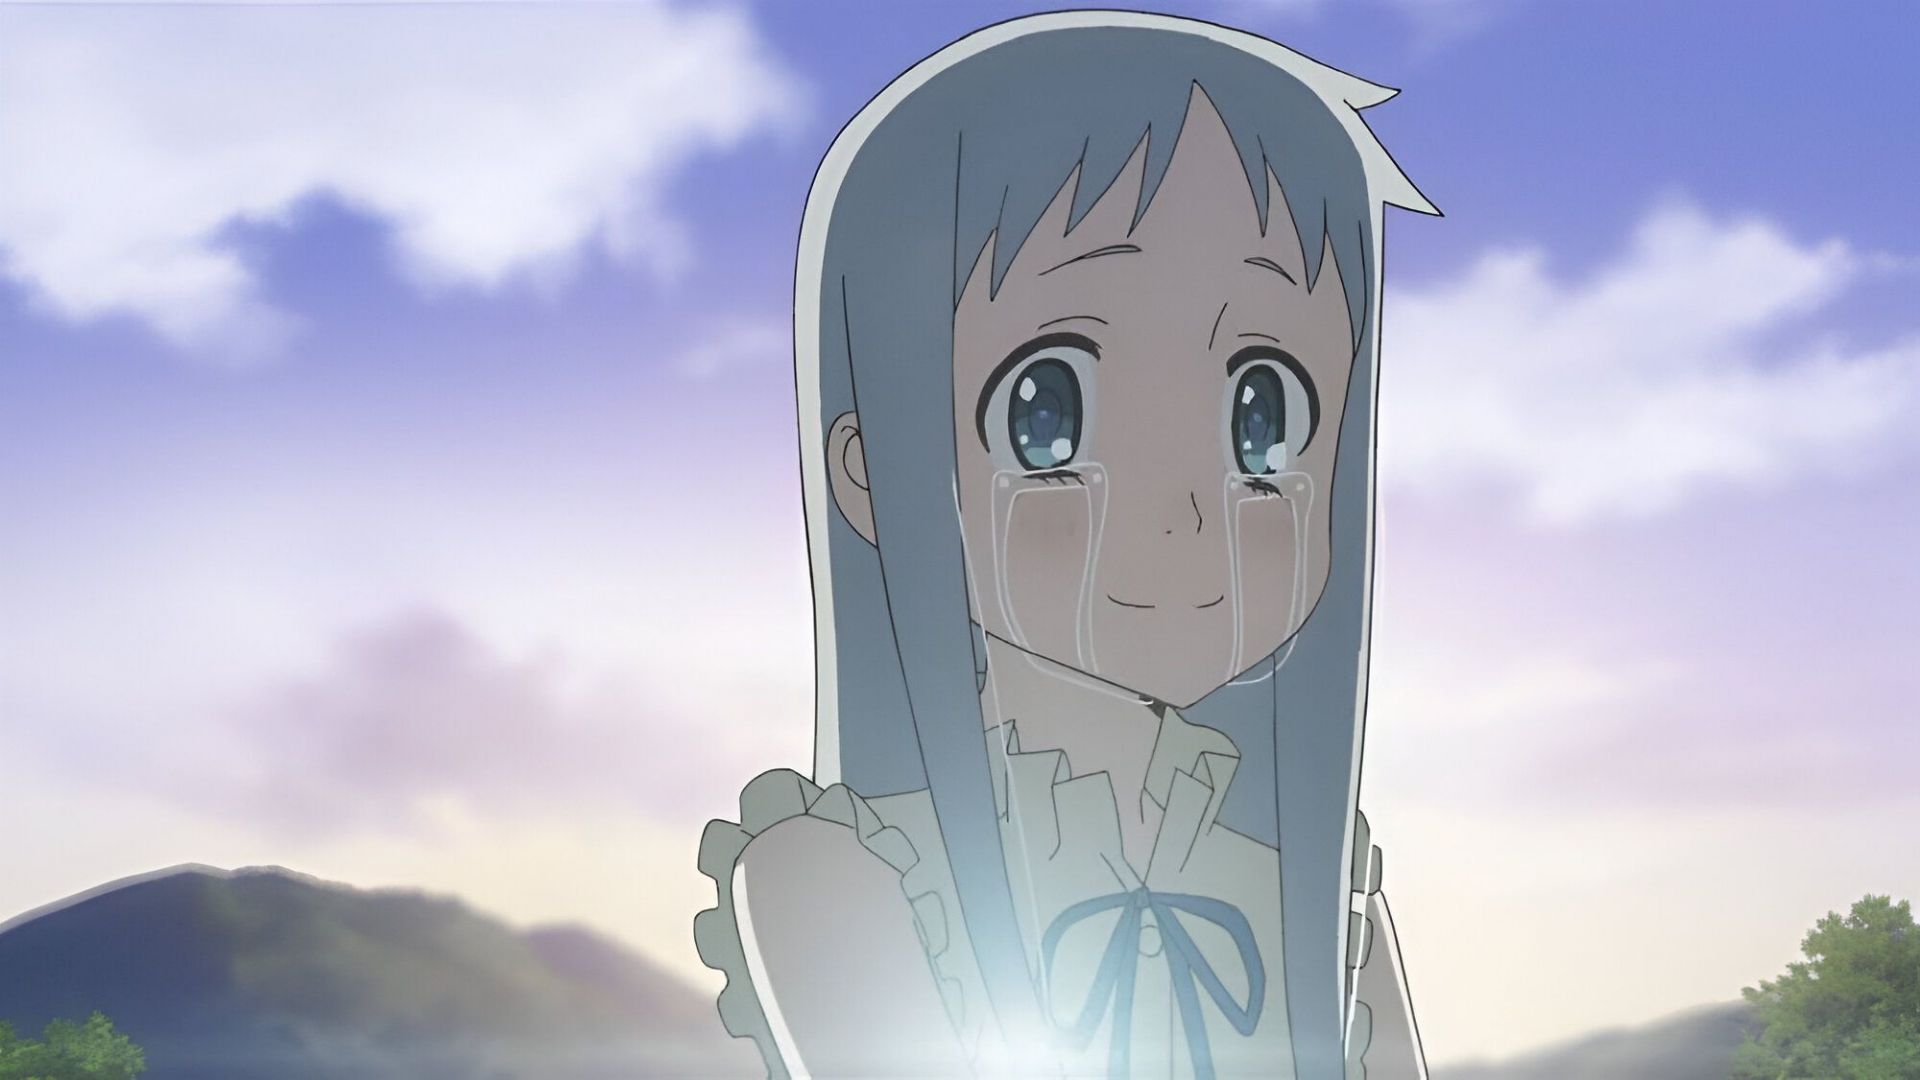 Menma as seen in Anohana (Image via A-1 Pictures)